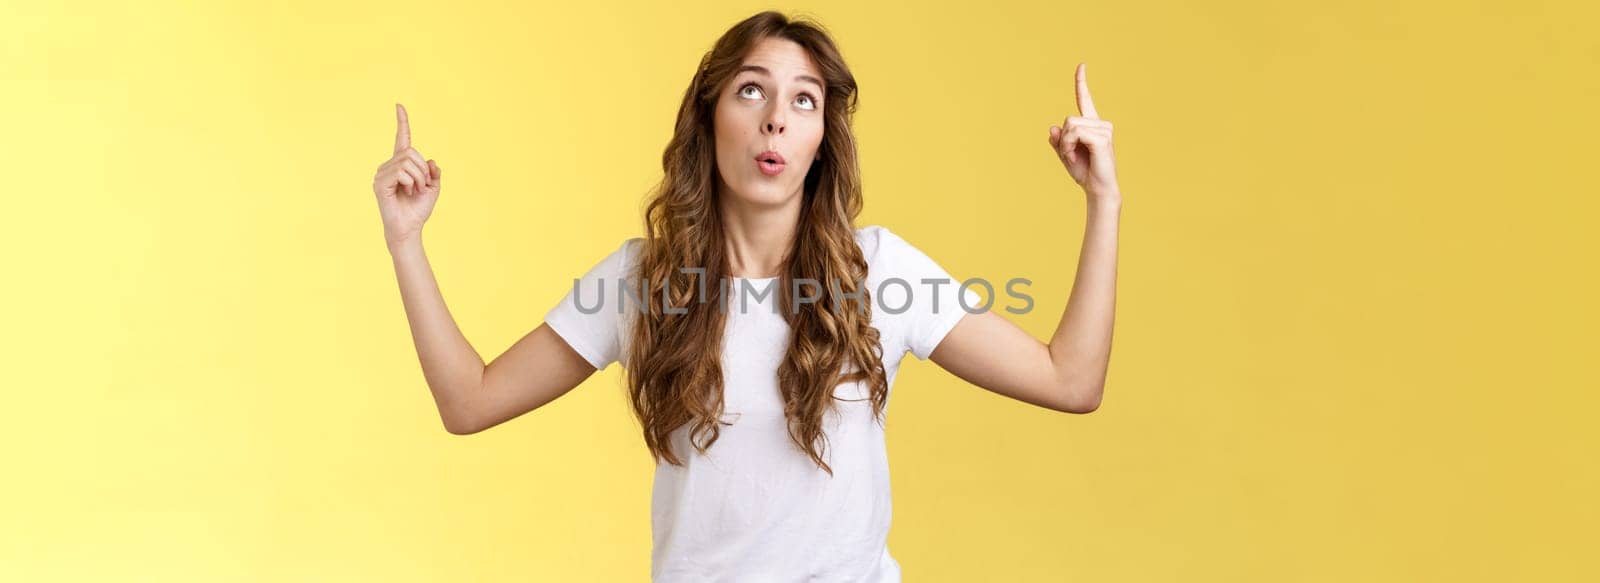 Impressed curious wondered attractive european woman long curly haircut look pointing index fingers up top copy space promo react astonished fascinated surprising event yellow background.